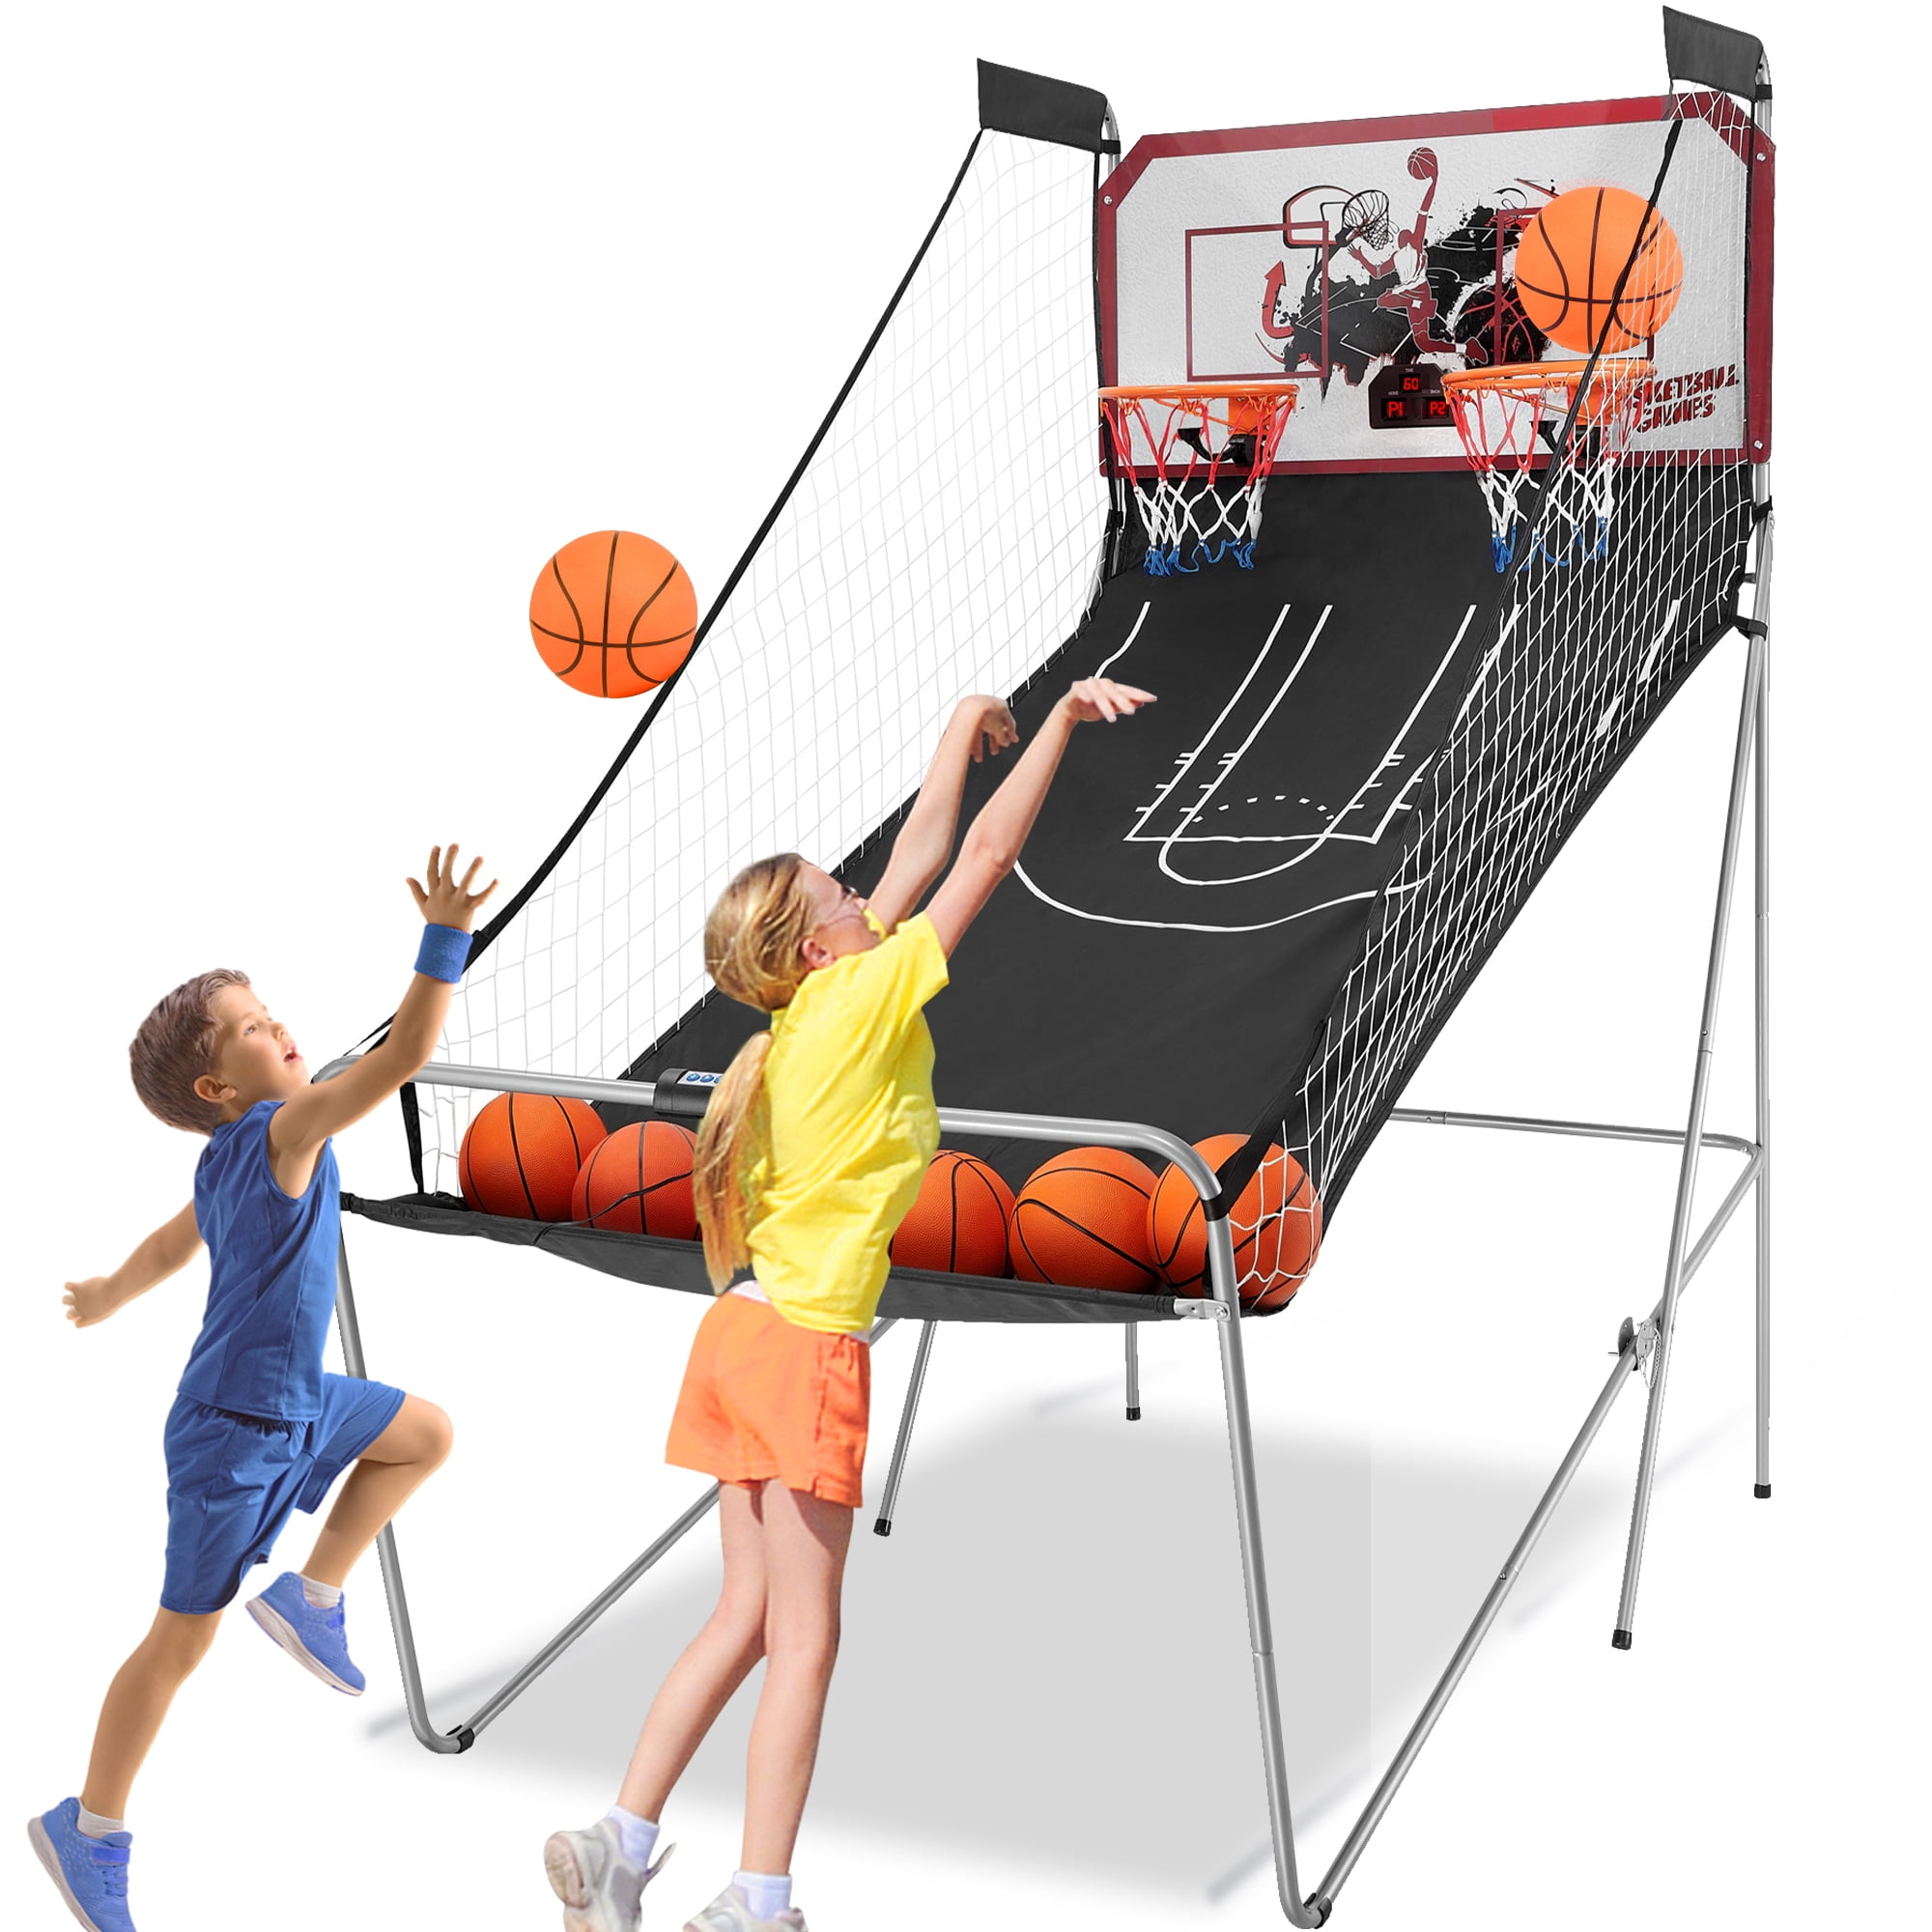  UBACKS Electronic Basketball Arcade Game Indoor - Foldable,  Dual Shot, with 4 Balls and 1 Air Pump : Toys & Games